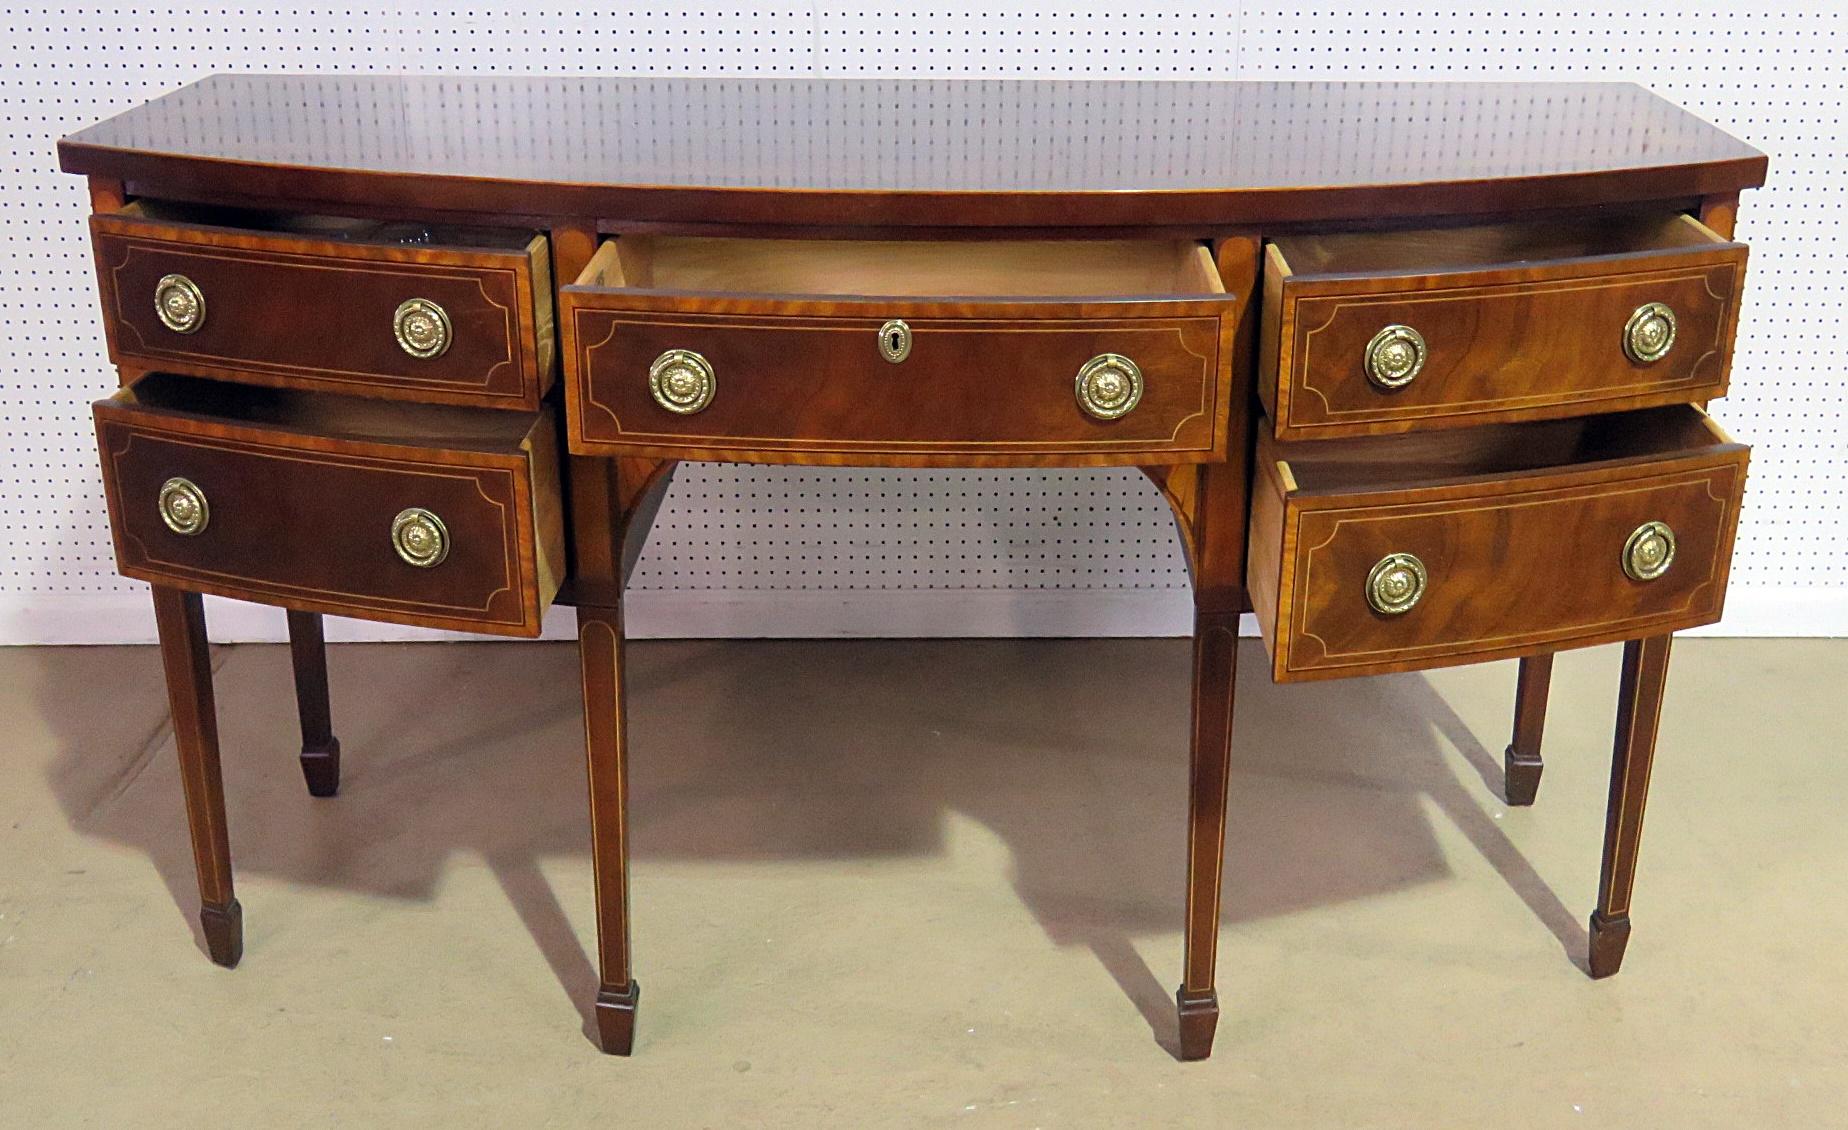 Baker Georgian style inlaid sideboard with five drawers.